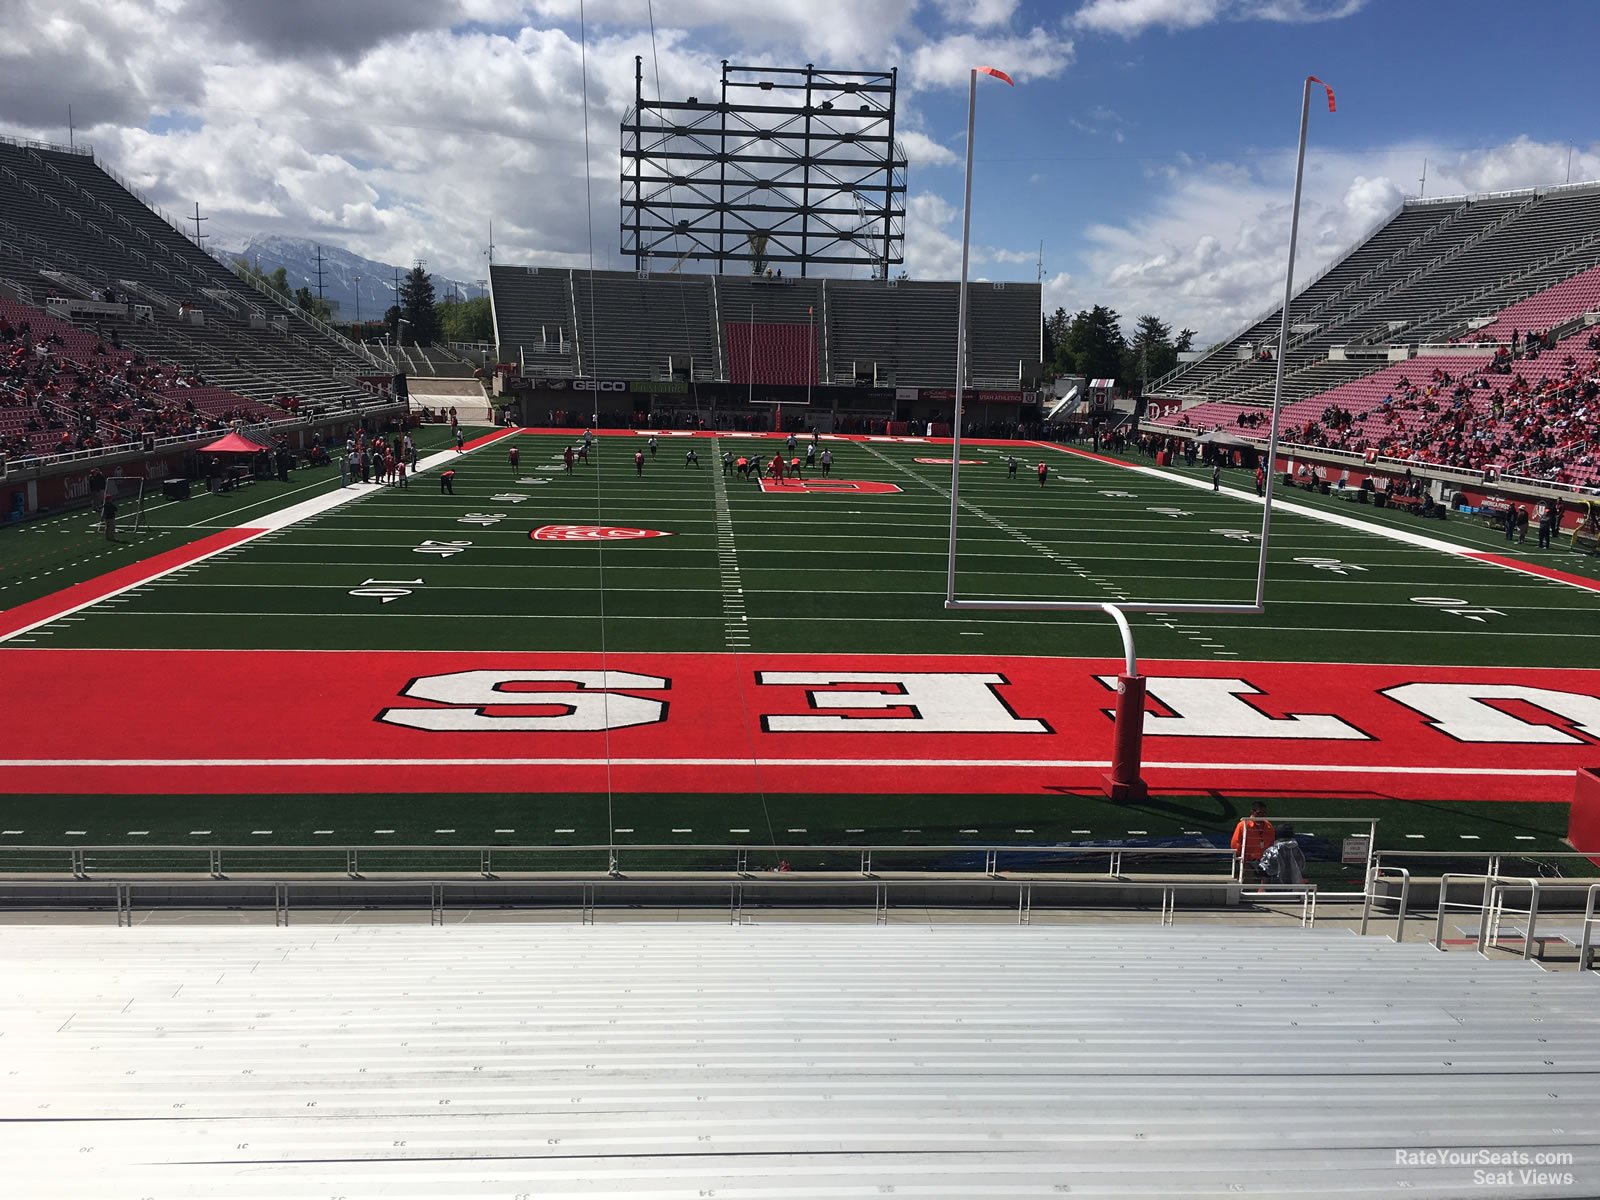 section n25, row 20 seat view  - rice-eccles stadium